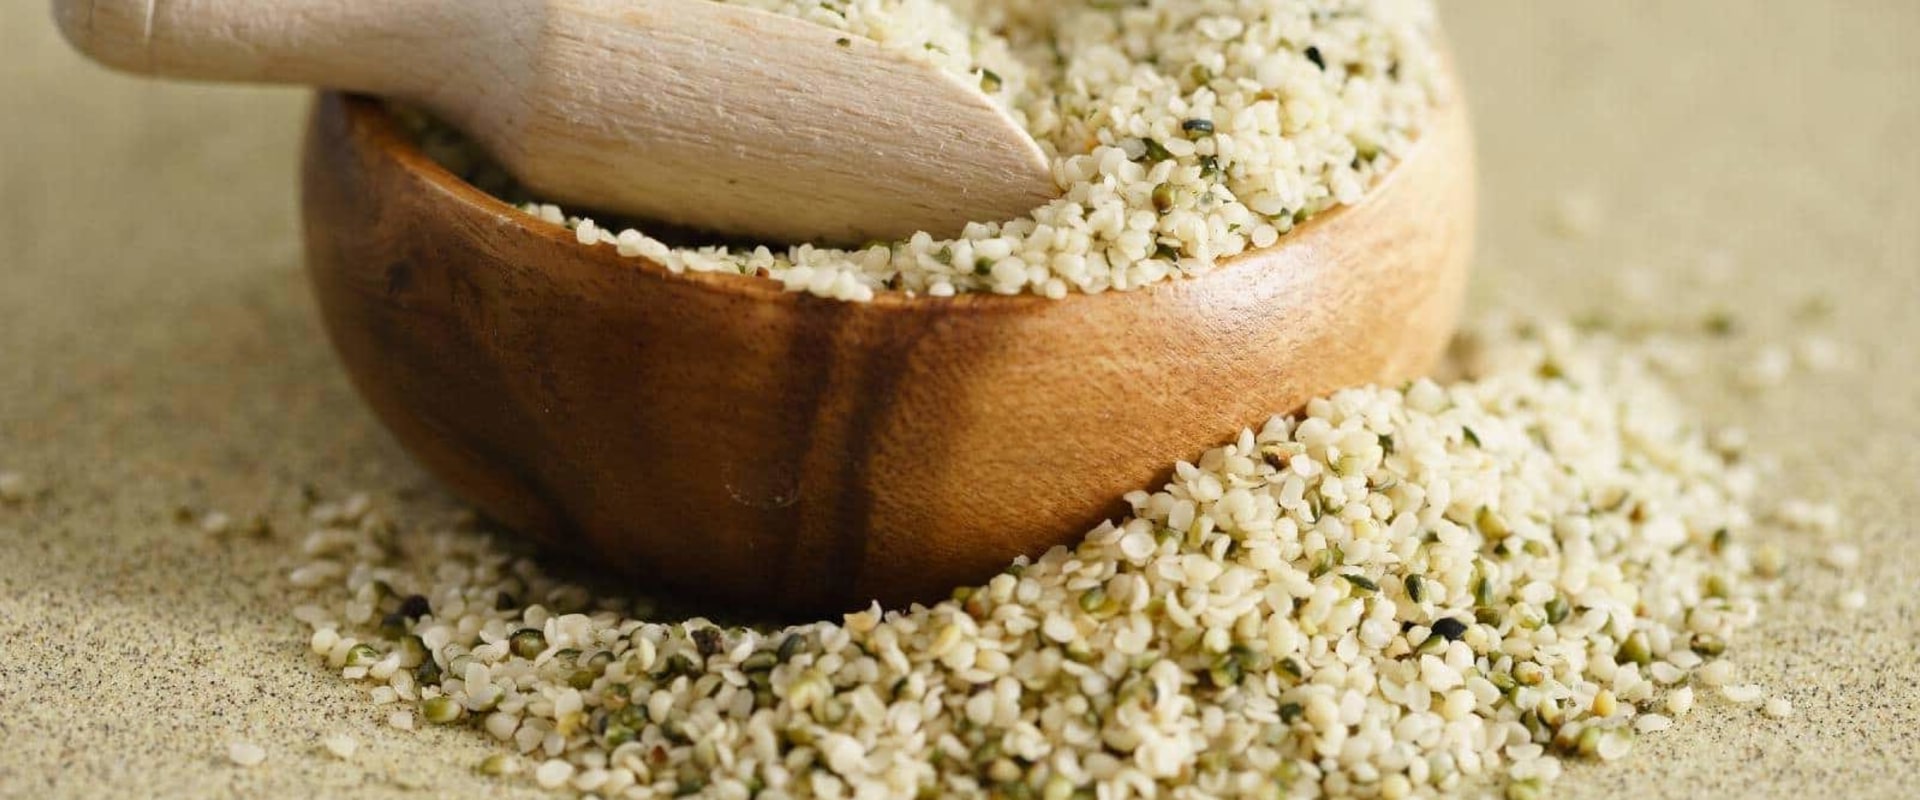 Why are hemp seeds considered a superfood?